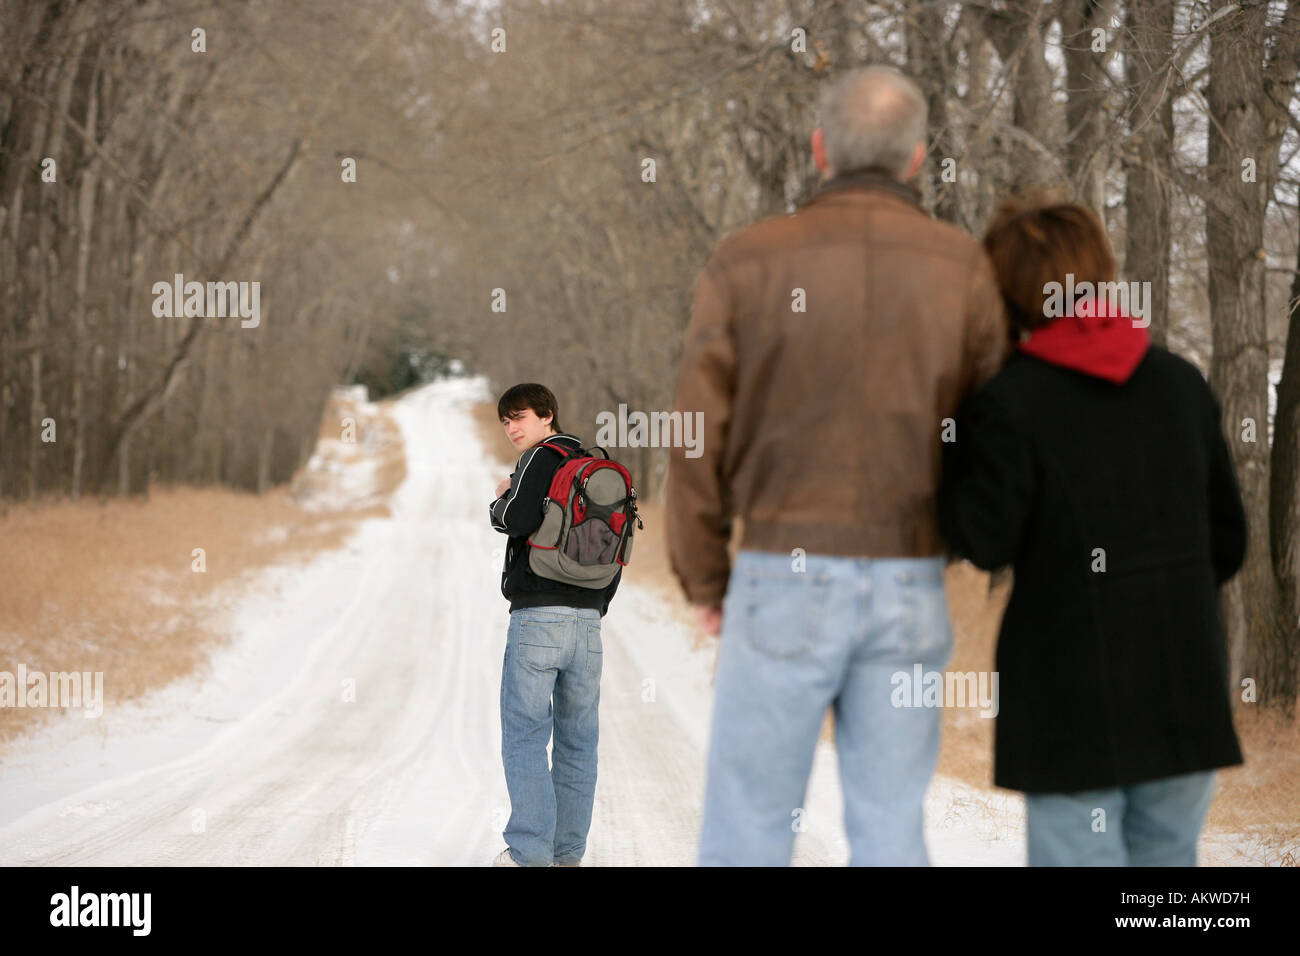 A teenage boy walking on a snow-covered path Stock Photo